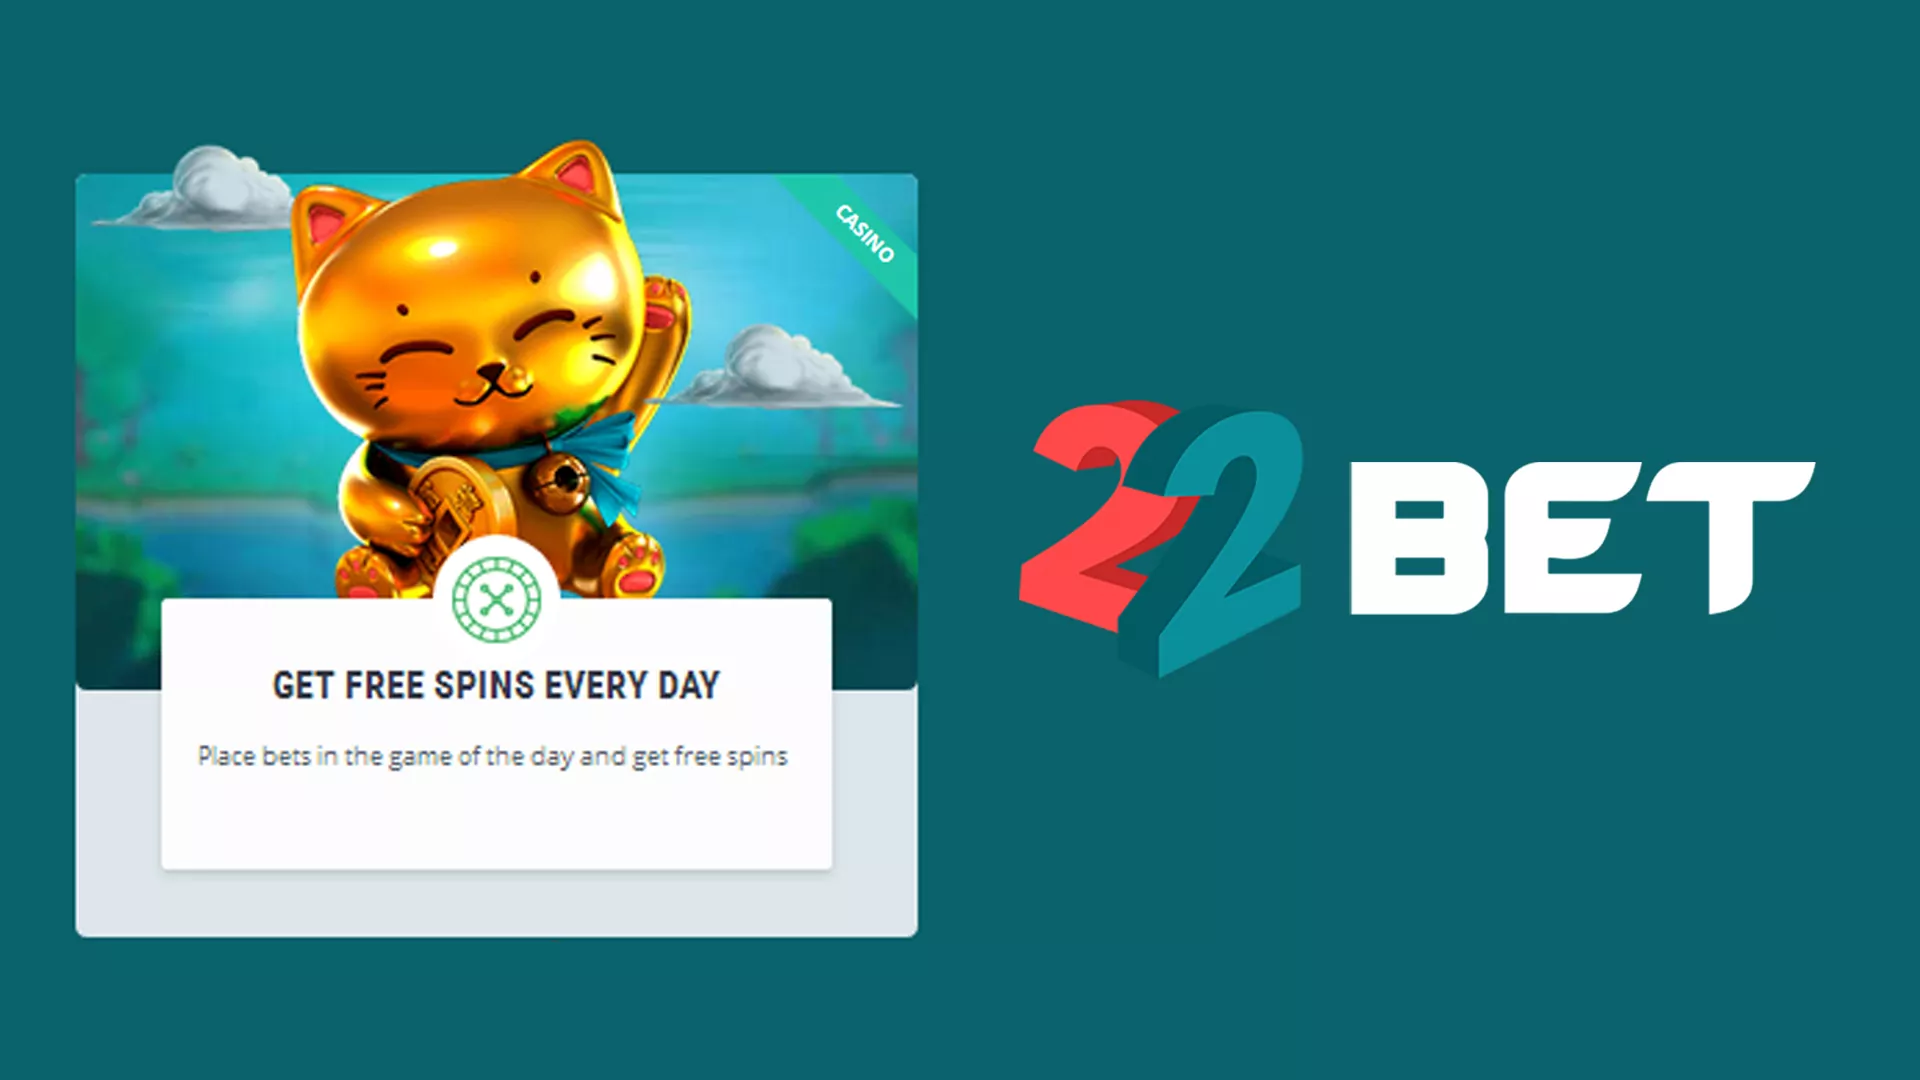 Use everyday free spins.